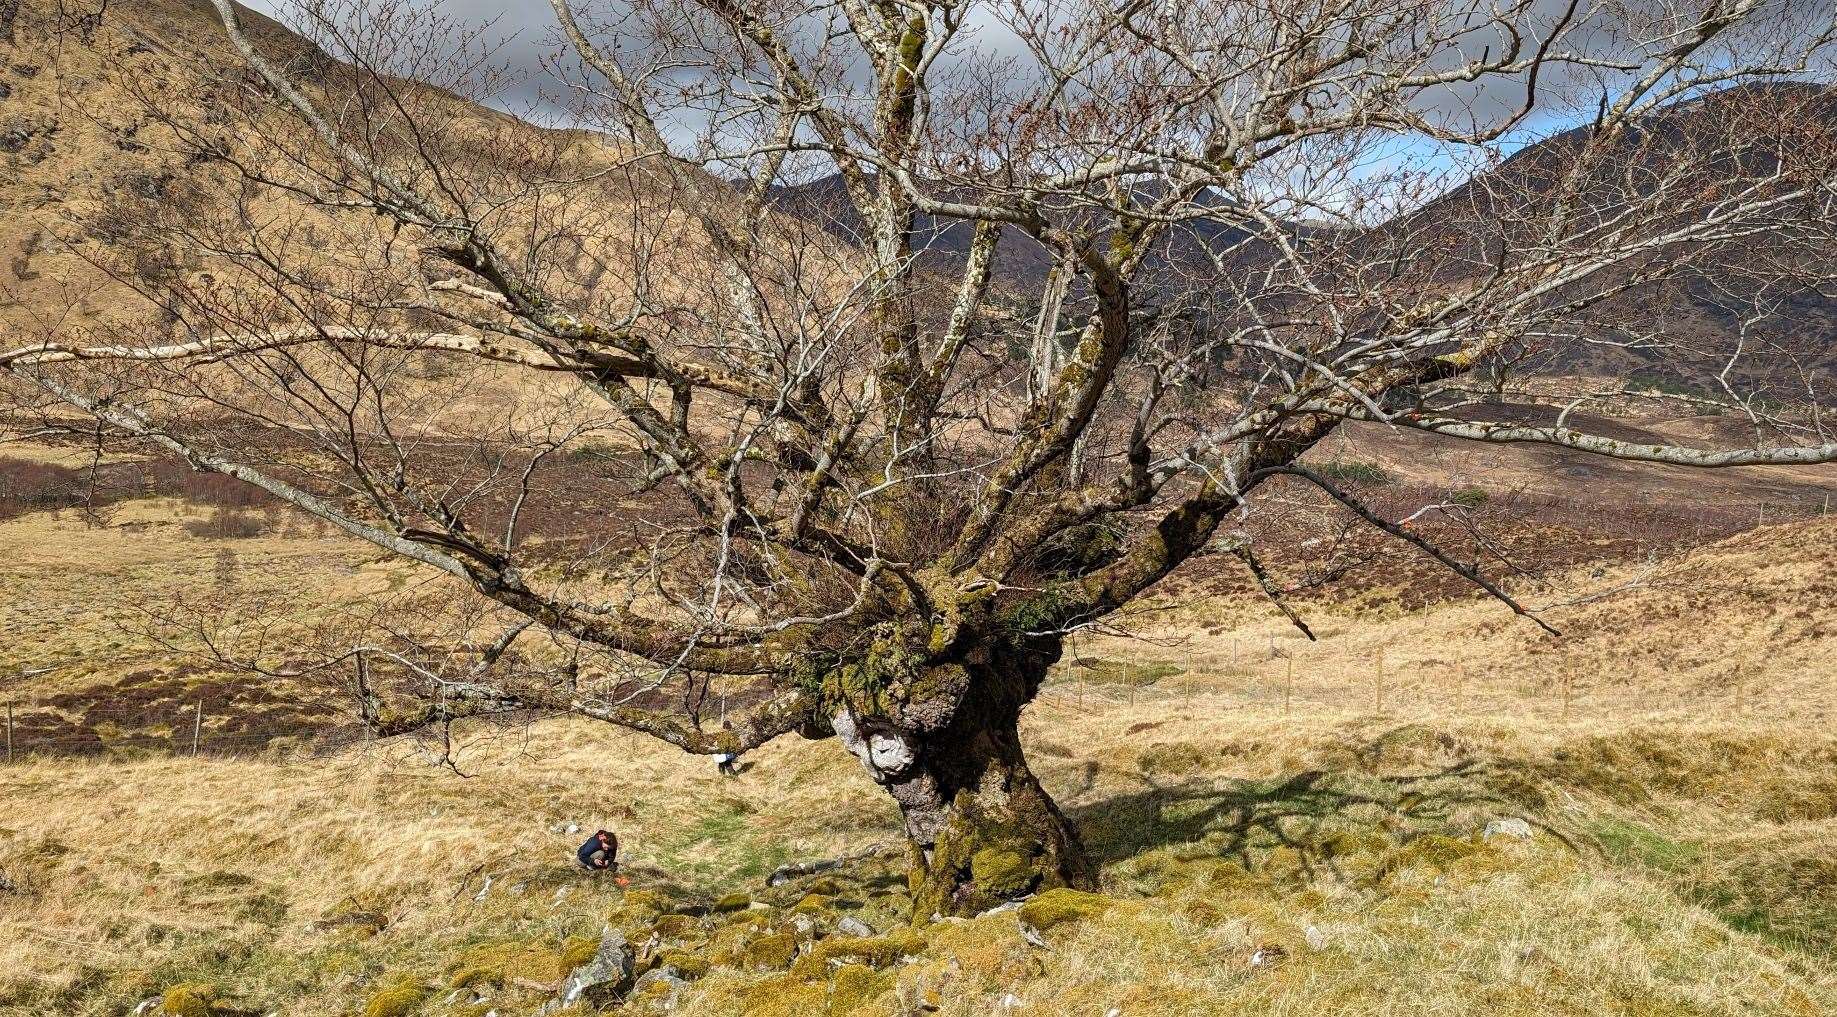 Young wych elm trees have been transferred from the Royal Botanic Garden Edinburgh and replanted in Glen Affric.